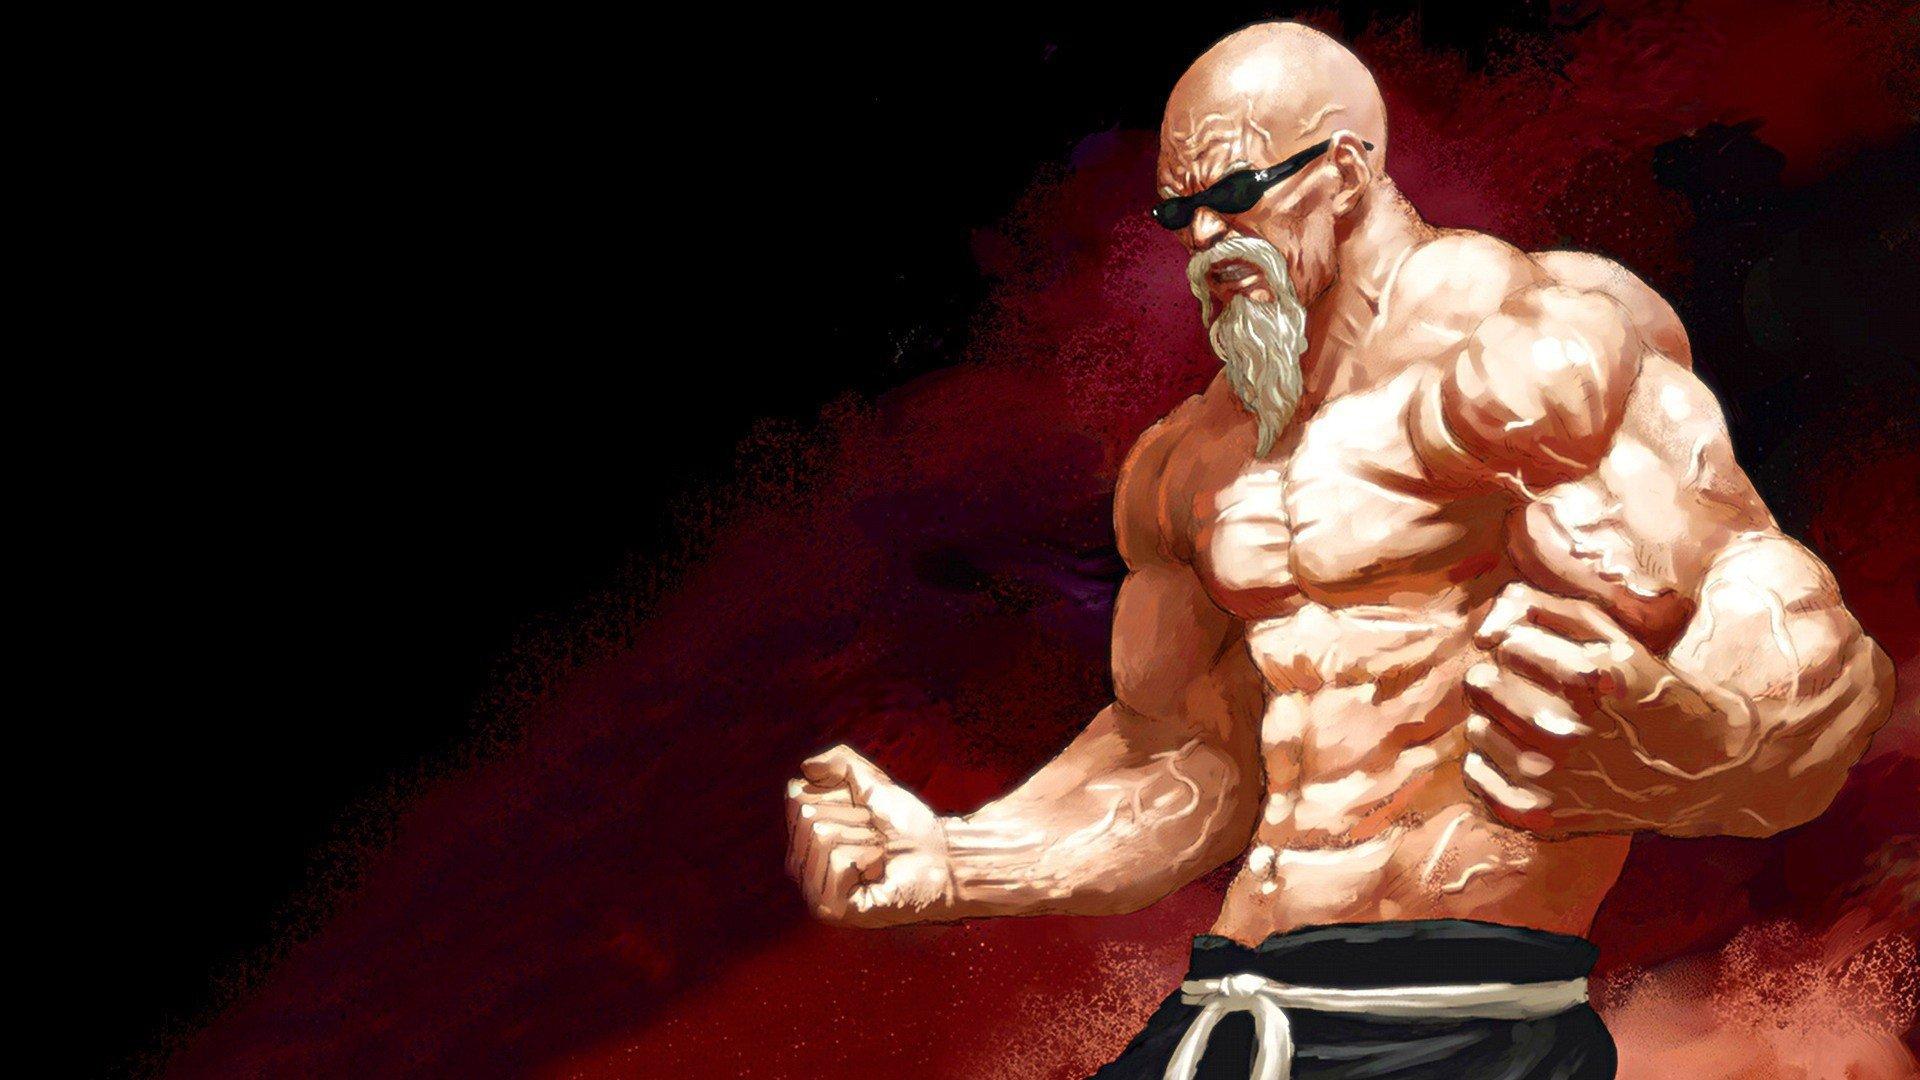 Muscular Anime Wallpapers - Wallpaper Cave